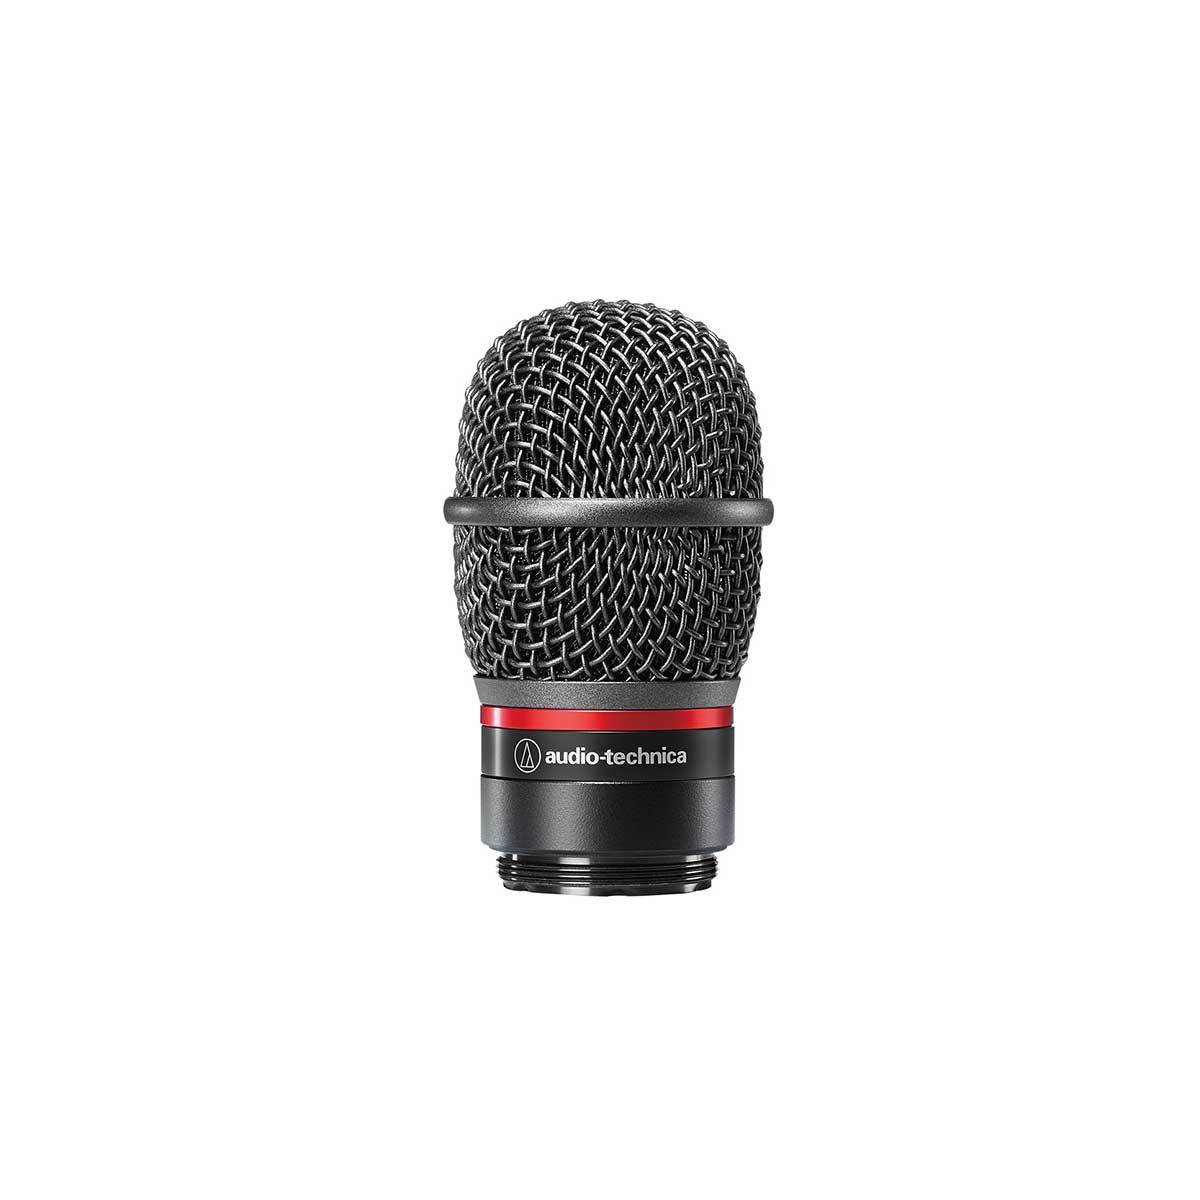 Wireless Systems - Audio-Technica ATW-C4100 Interchangeable Cardioid Dynamic Microphone Capsule